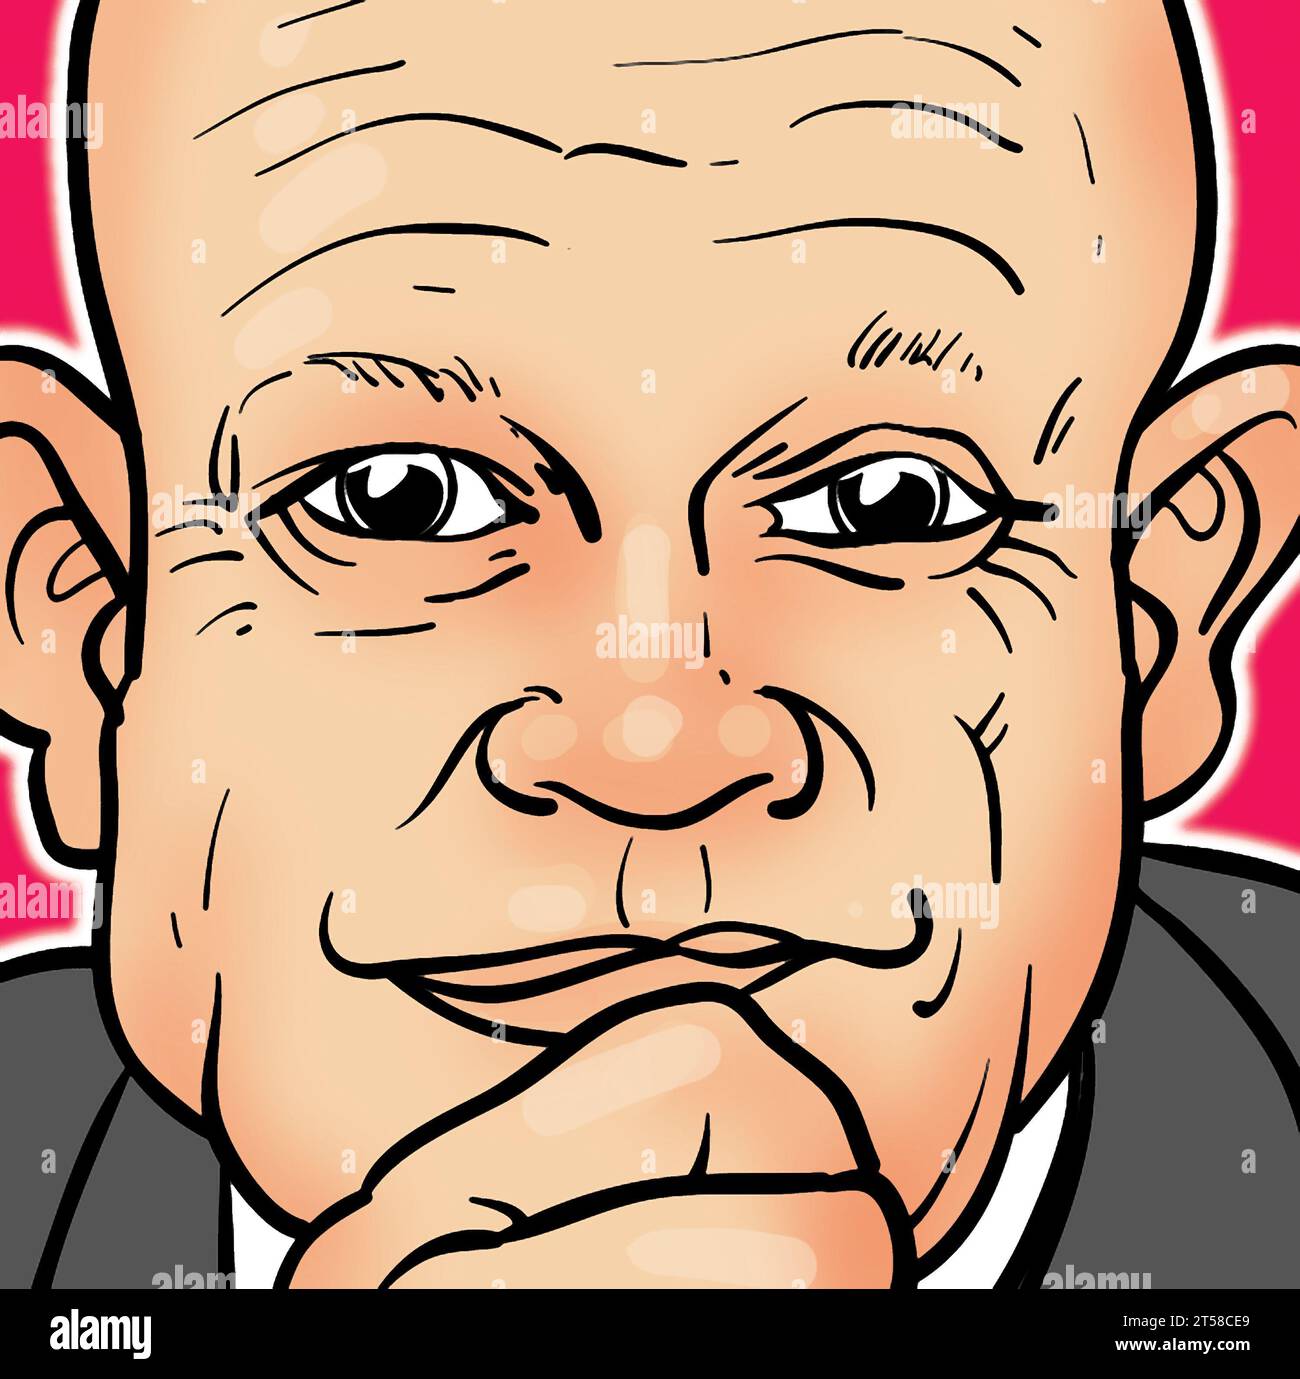 Art illustration Dwight David Eisenhower Dwight D. Eisenhower, nicknamed Ike, who served as the 34th president of the United States from 1953 to 1961. Stock Photo